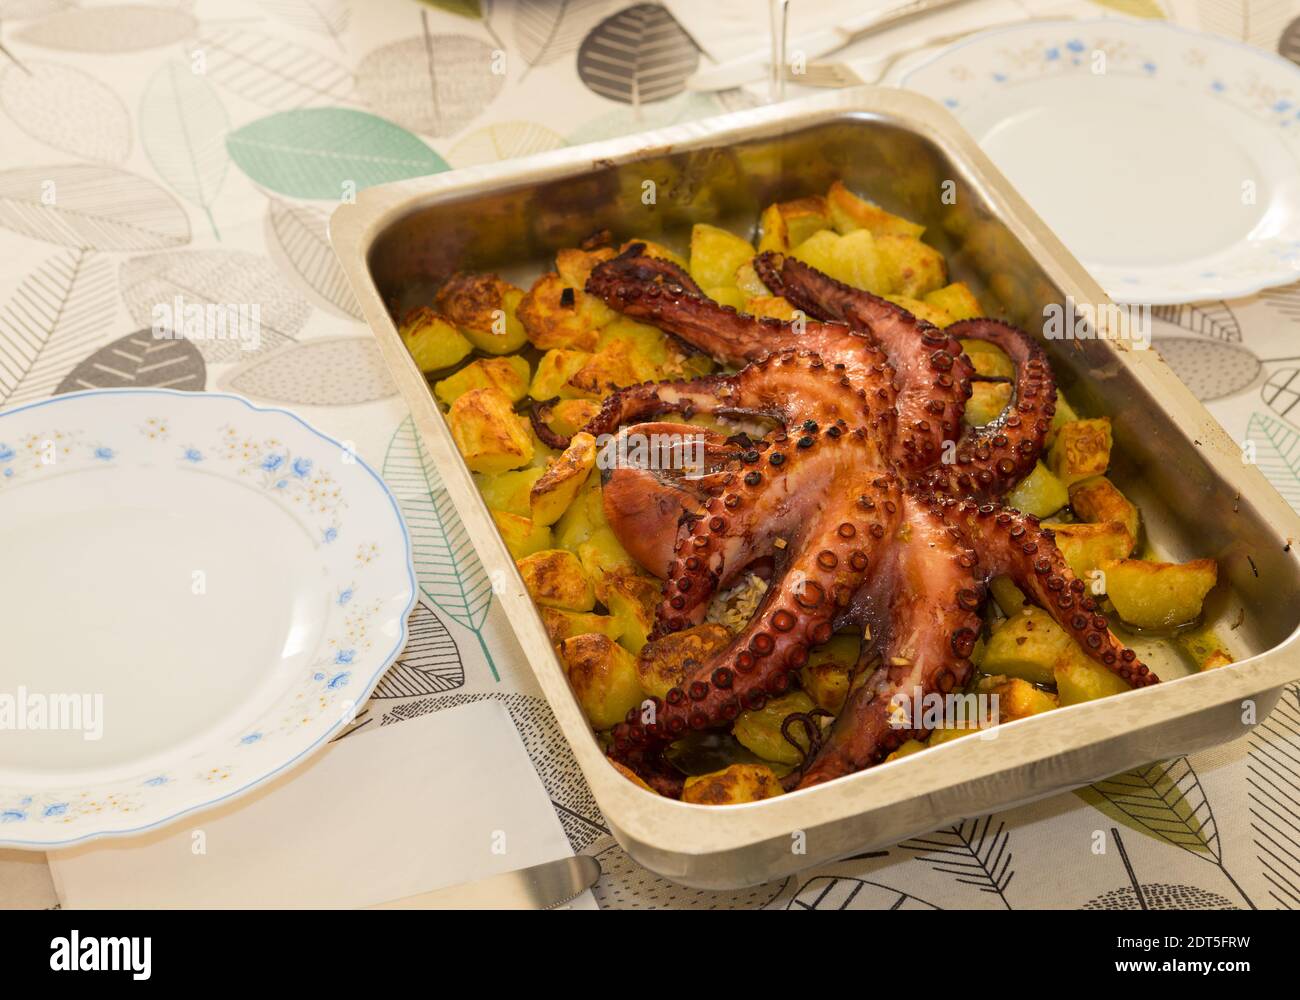 Famous portuguese dish 'Polvo a lagareiro'. Homemade roasted octopus with potatoes ready to eat. Traditional portuguese dish. Stock Photo